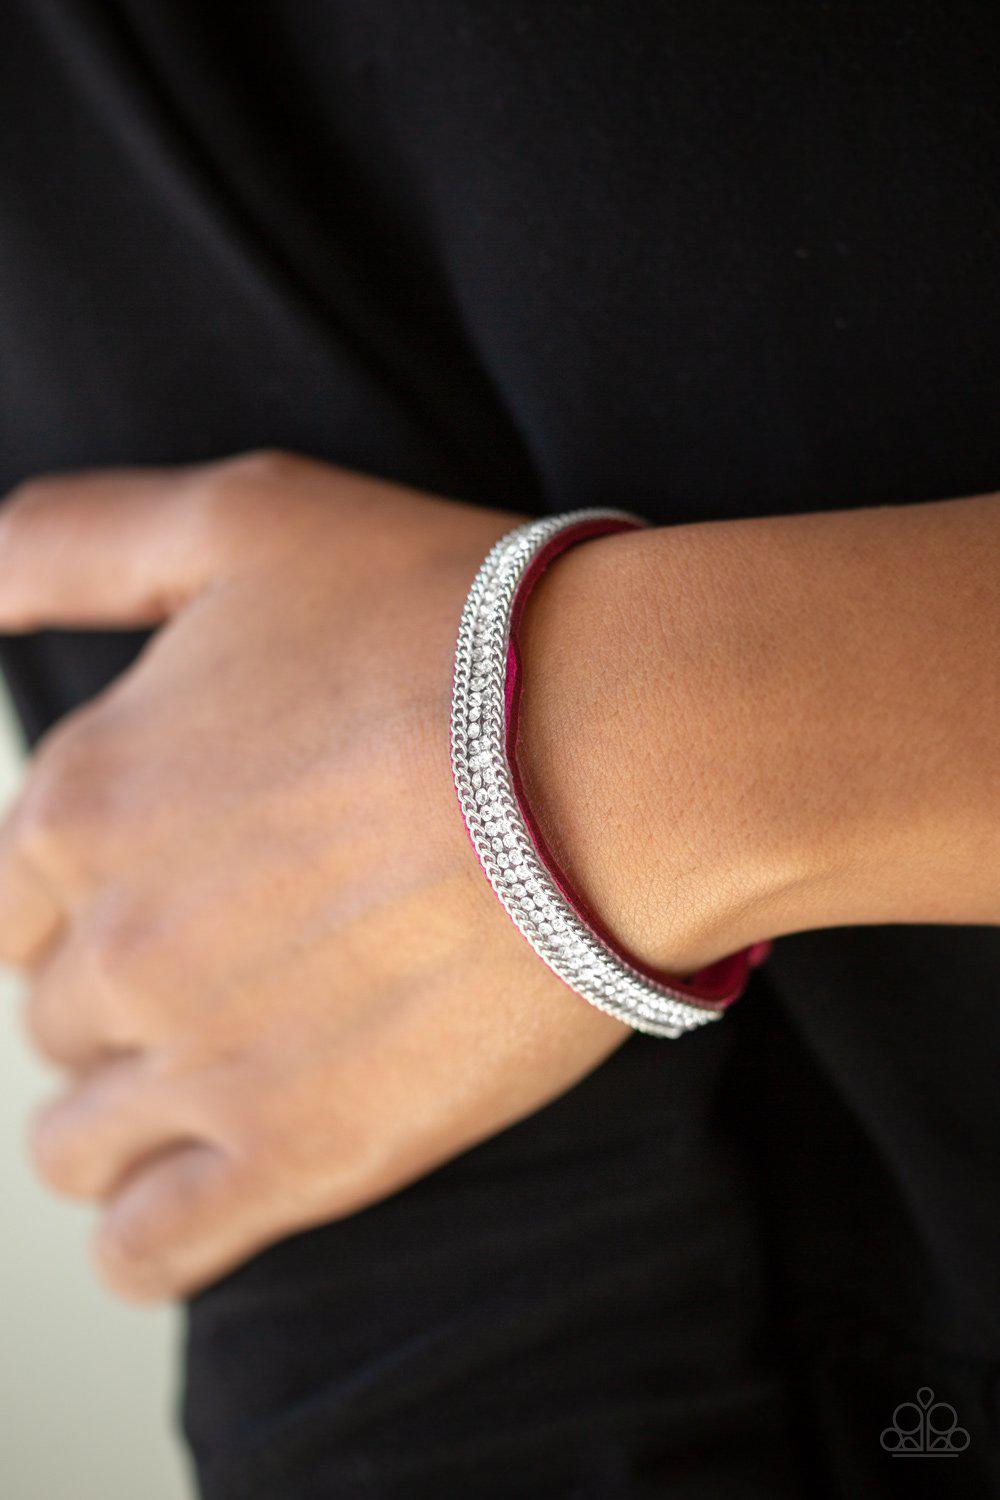 Babe Bling Pink and White Narrow Wrap Snap Bracelet - Paparazzi Accessories-CarasShop.com - $5 Jewelry by Cara Jewels